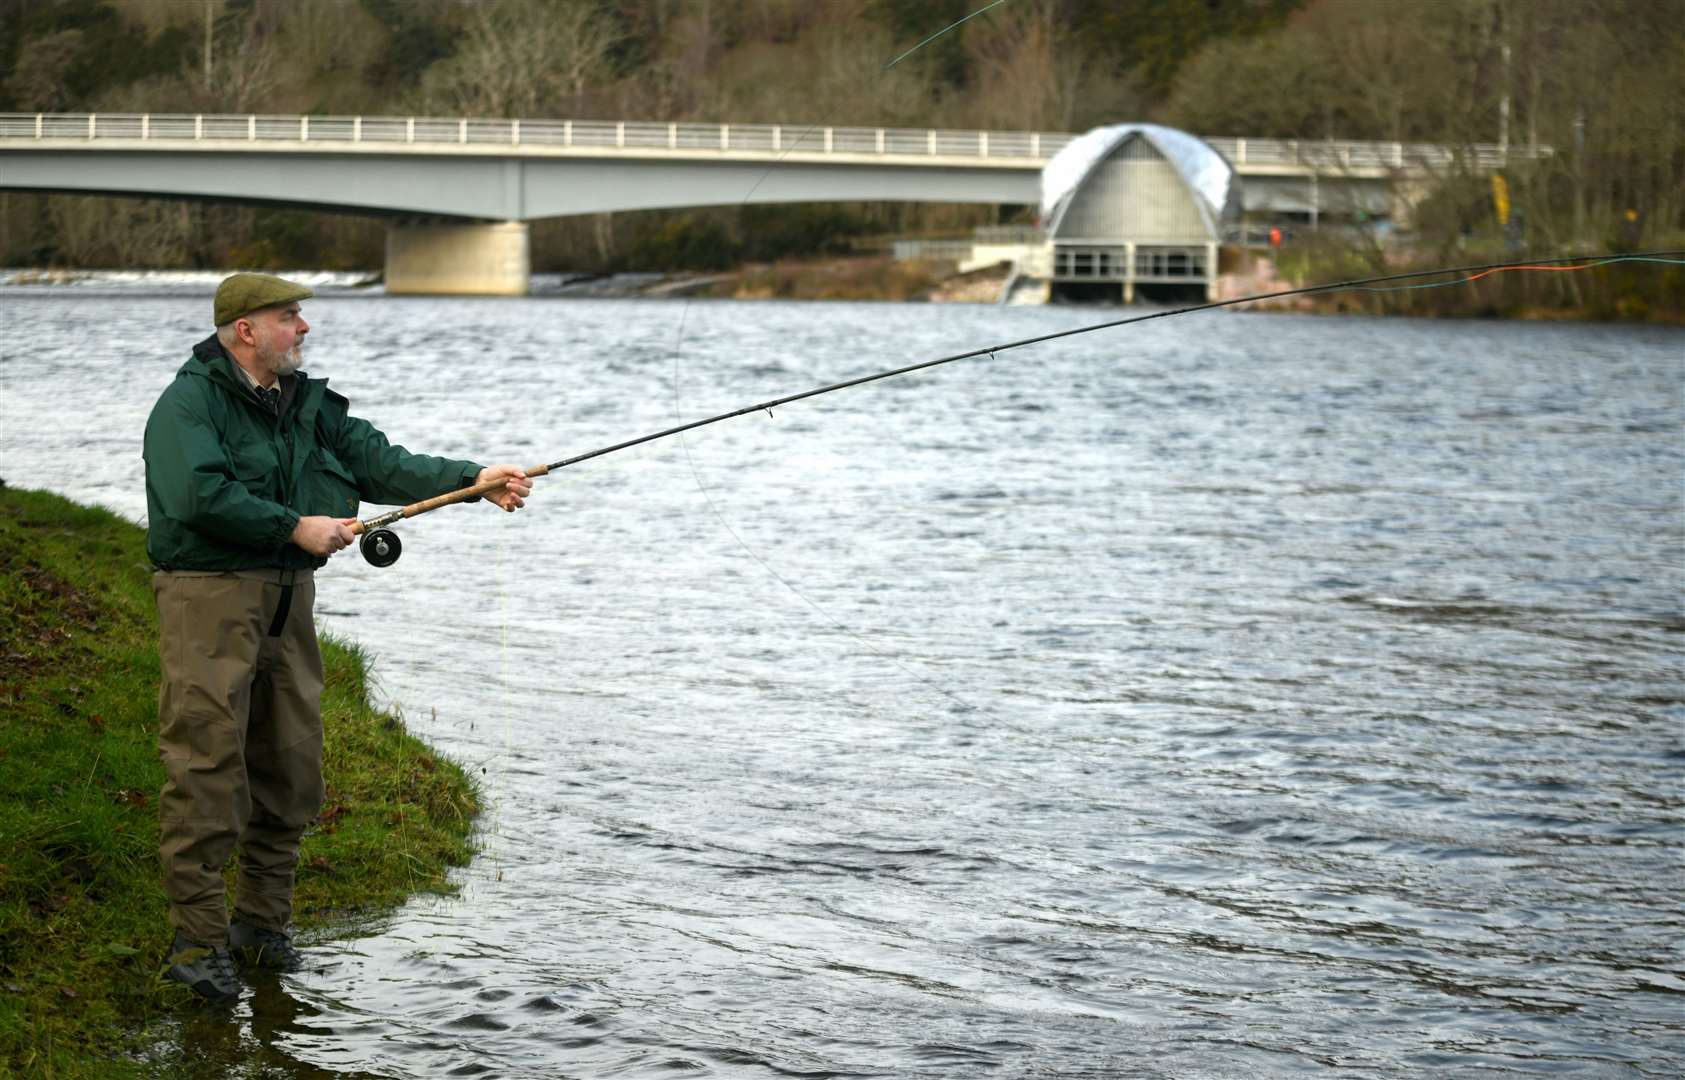 The buyout will help to protect salmon on the final leg of their return journey to the area's rivers.